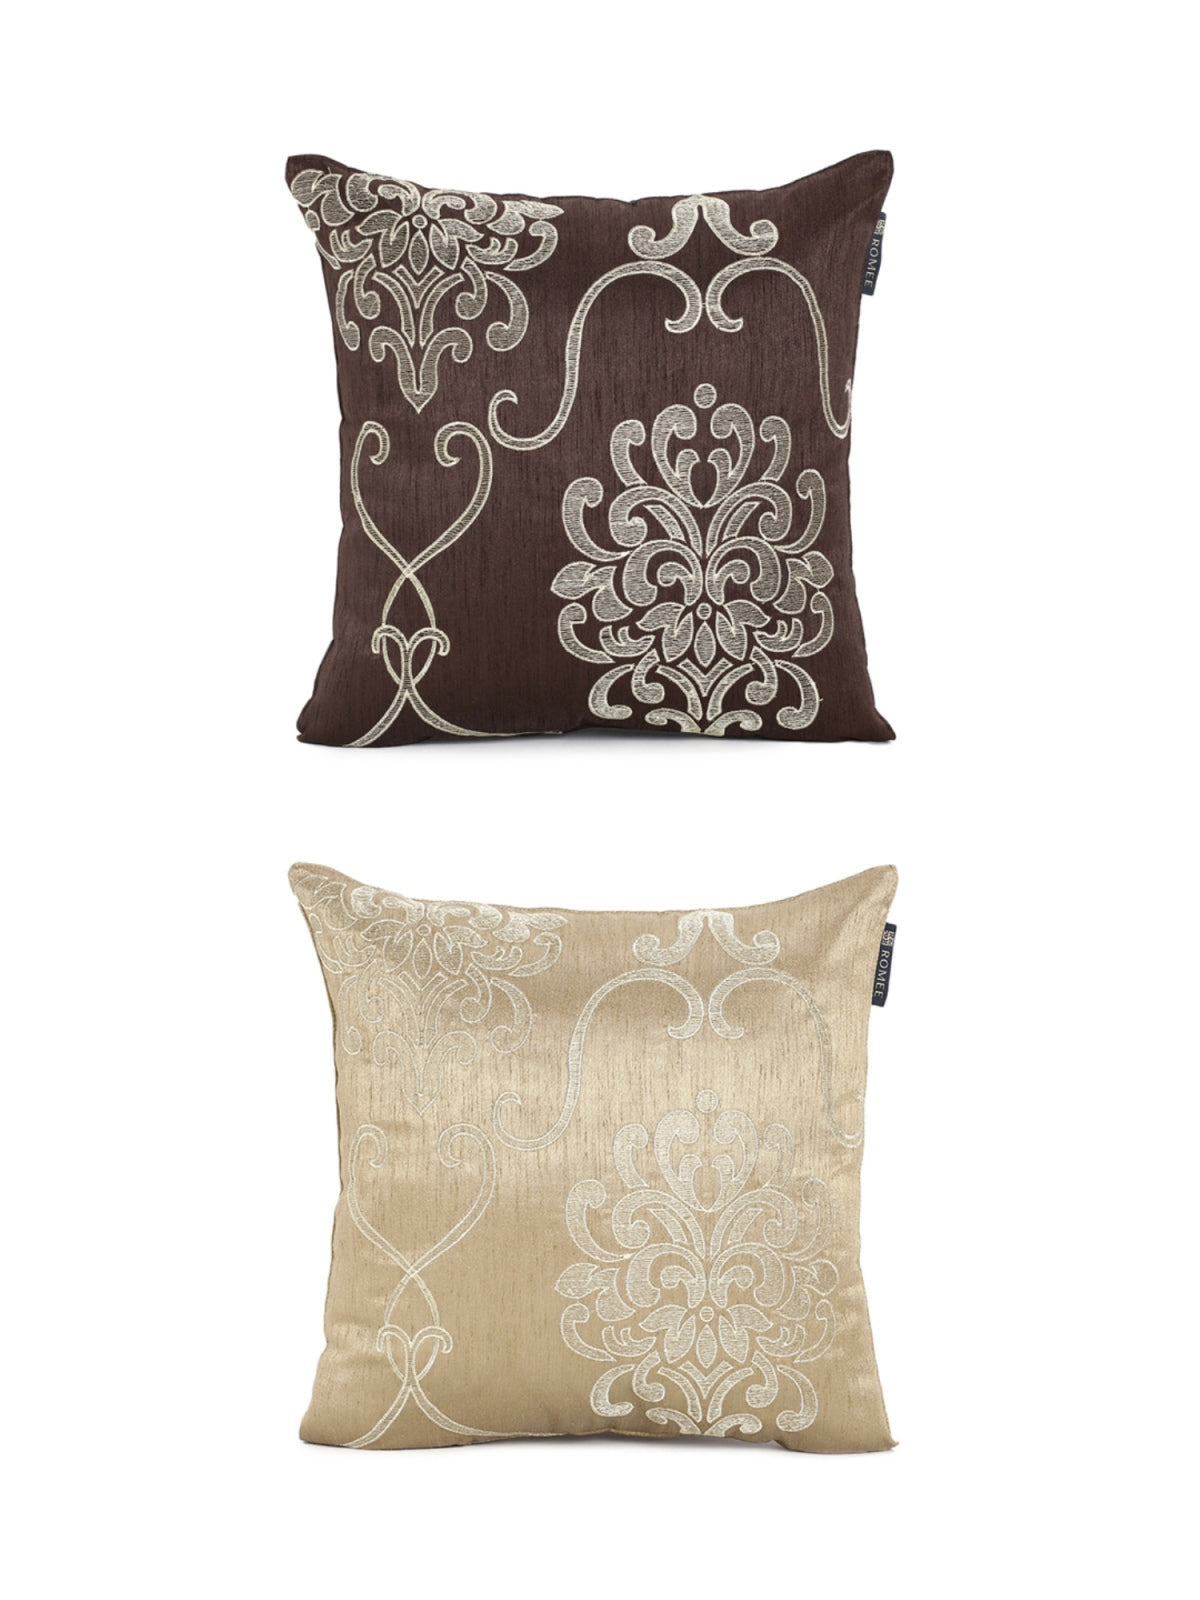 Soft Polyester Designer Embroidered Cushion Cover 16x16 Set of 2 - Brown & Beige